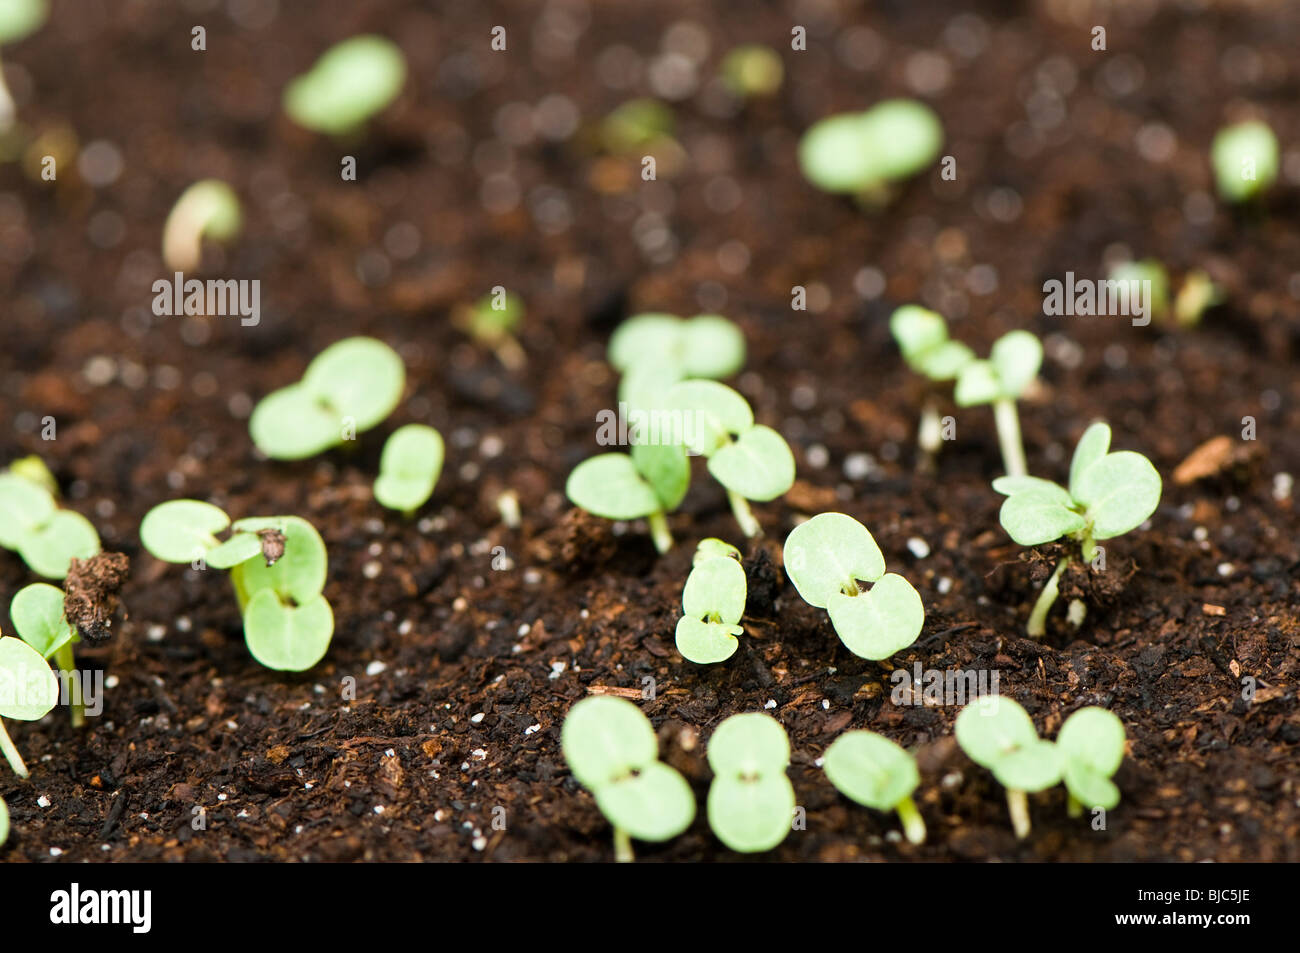 Salvia Horminum Blue Monday, Clary Sage, newly germinated seedlings in a tray in a greenhouse Stock Photo